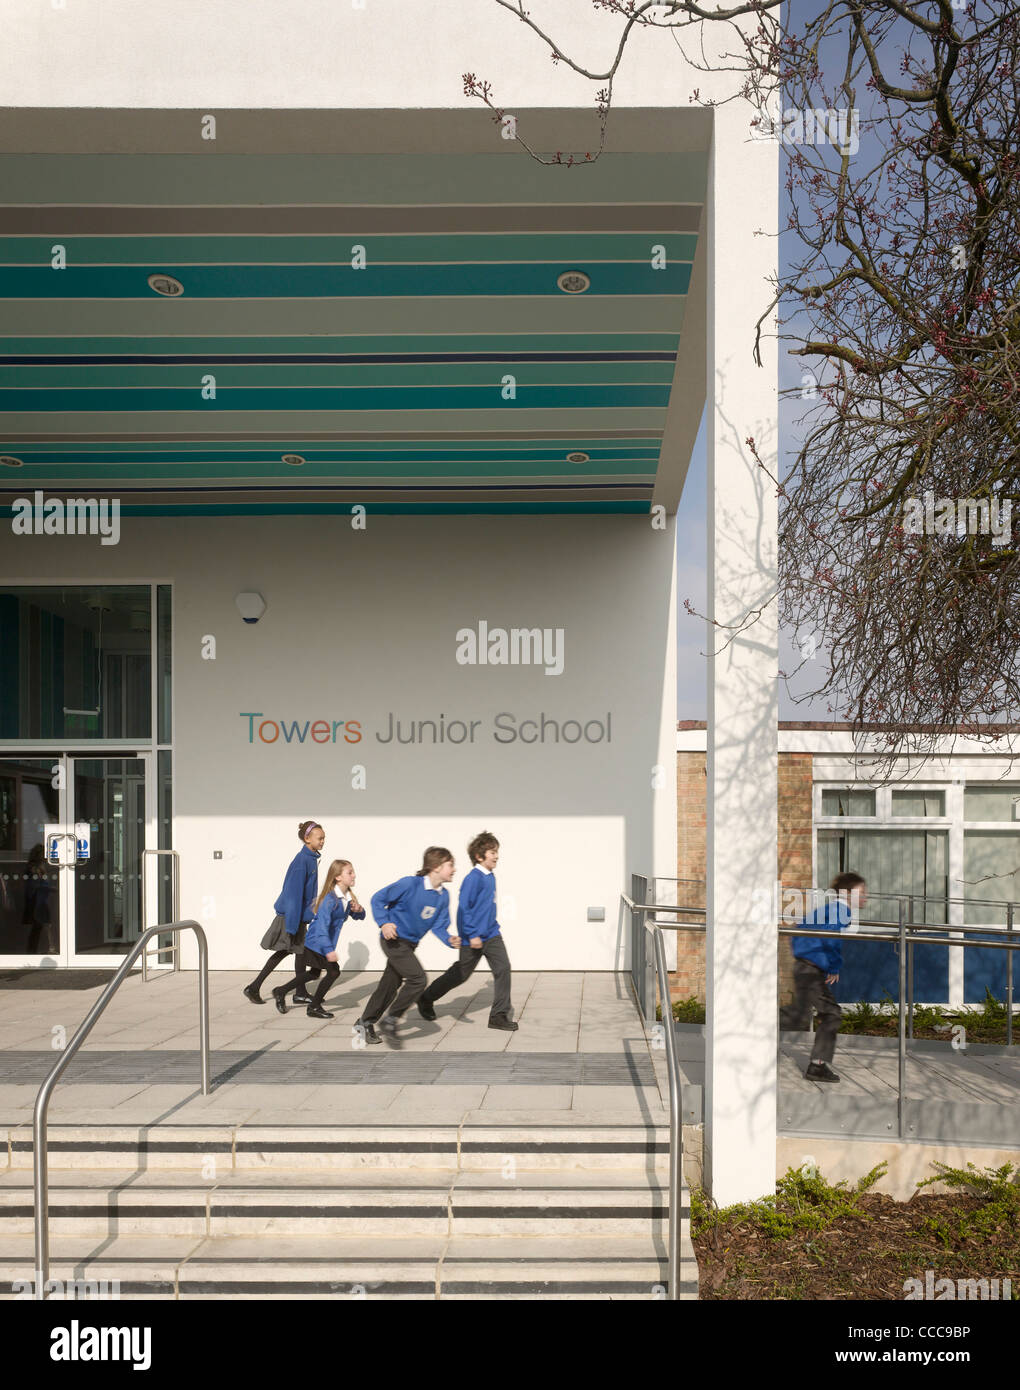 Towers Junior School Is A Two-Form-Entry Primary School For 240 Pupils. The Approach Focused On Adaptable, Flexible Development Stock Photo